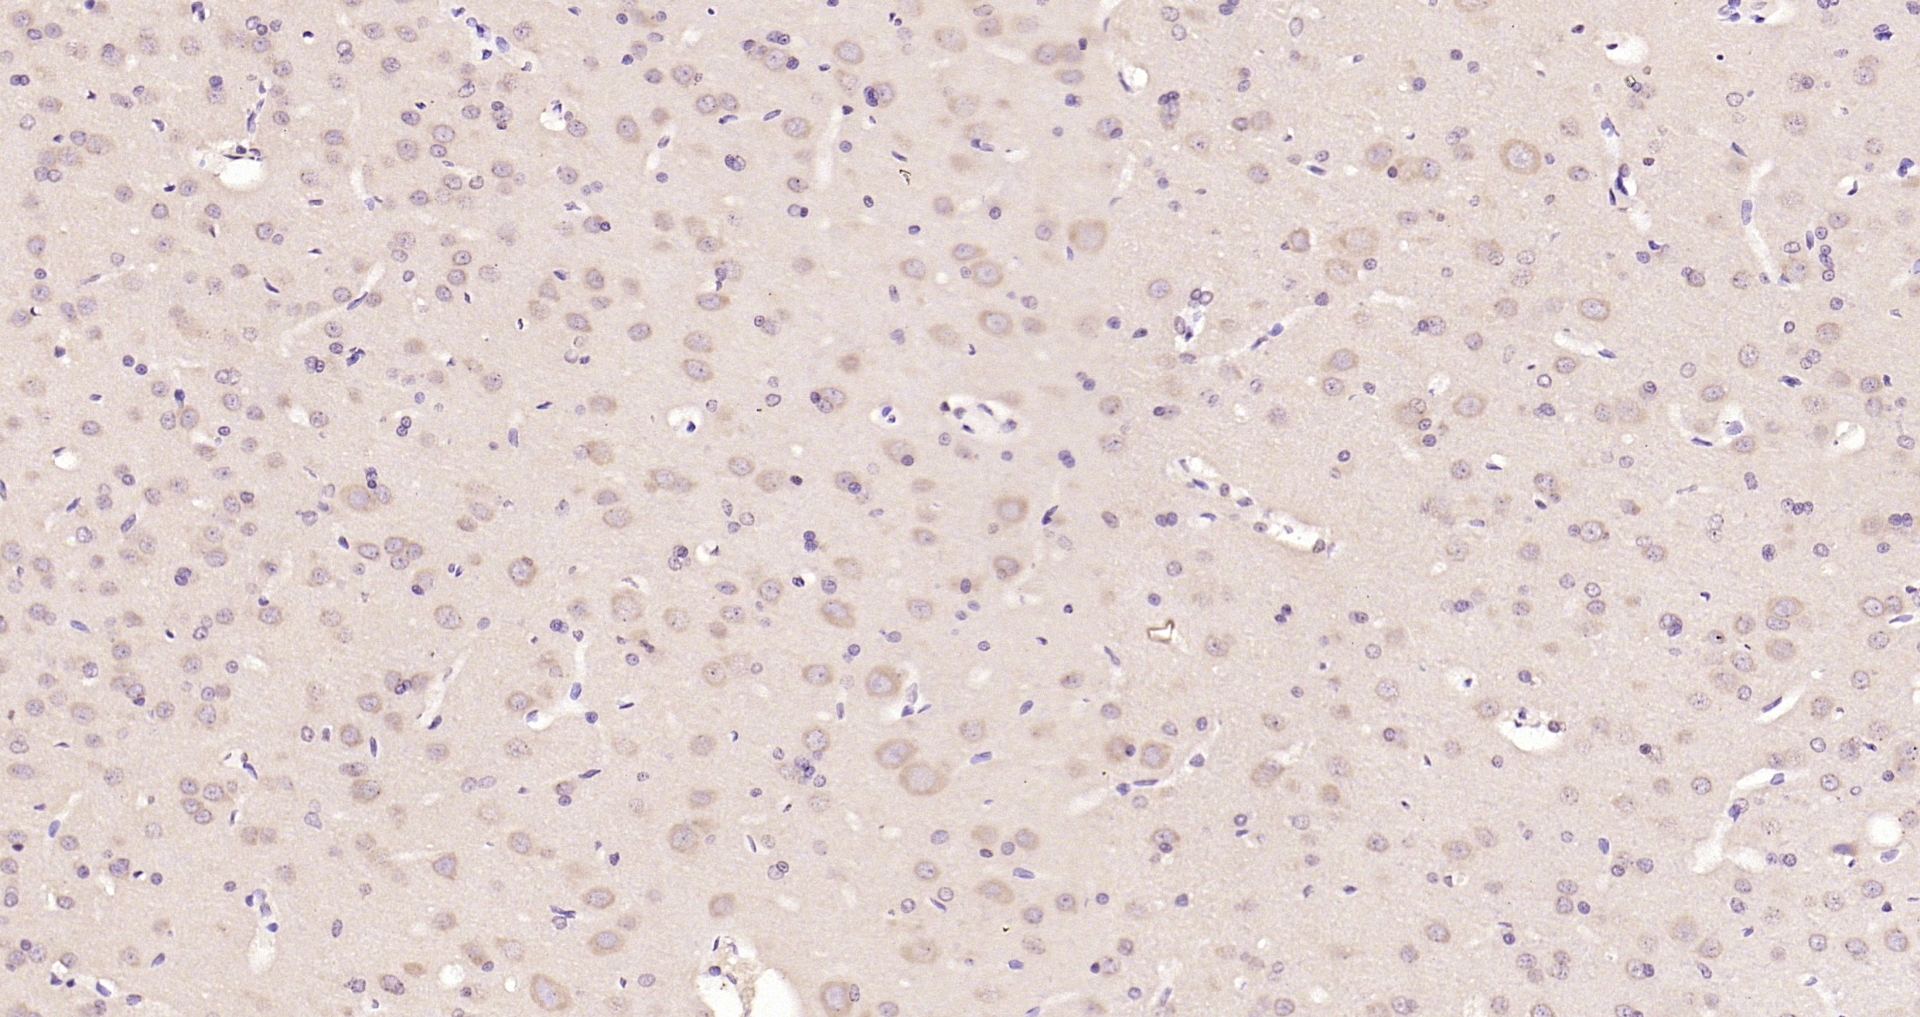 Paraformaldehyde-fixed, paraffin embedded Rat brain; Antigen retrieval by boiling in sodium citrate buffer (pH6.0) for 15min; Block endogenous peroxidase by 3% hydrogen peroxide for 20 minutes; Blocking buffer (normal goat serum) at 37°C for 30min; Antibody incubation with 14-3-3 Alpha + Beta + Gamma + Delta + Epsilon Polyclonal Antibody, Unconjugated (bs-0237R) at 1:200 overnight at 4°C, DAB staining.